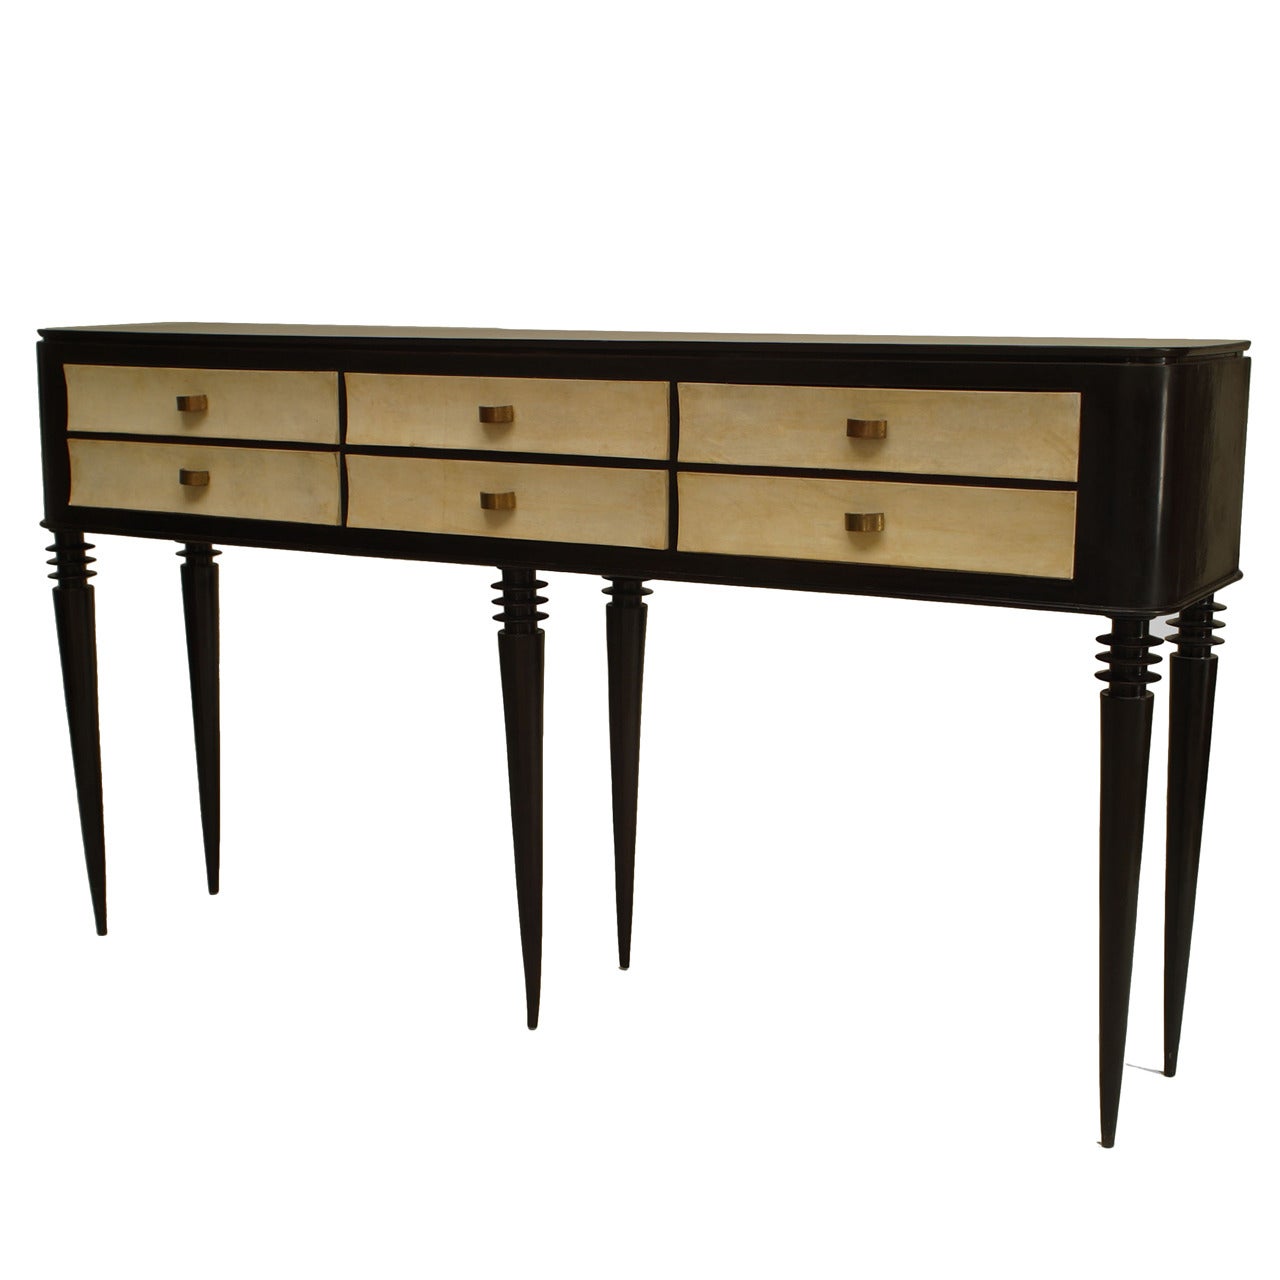 1940's Italian Parchment and Ebonized Wood Console Table